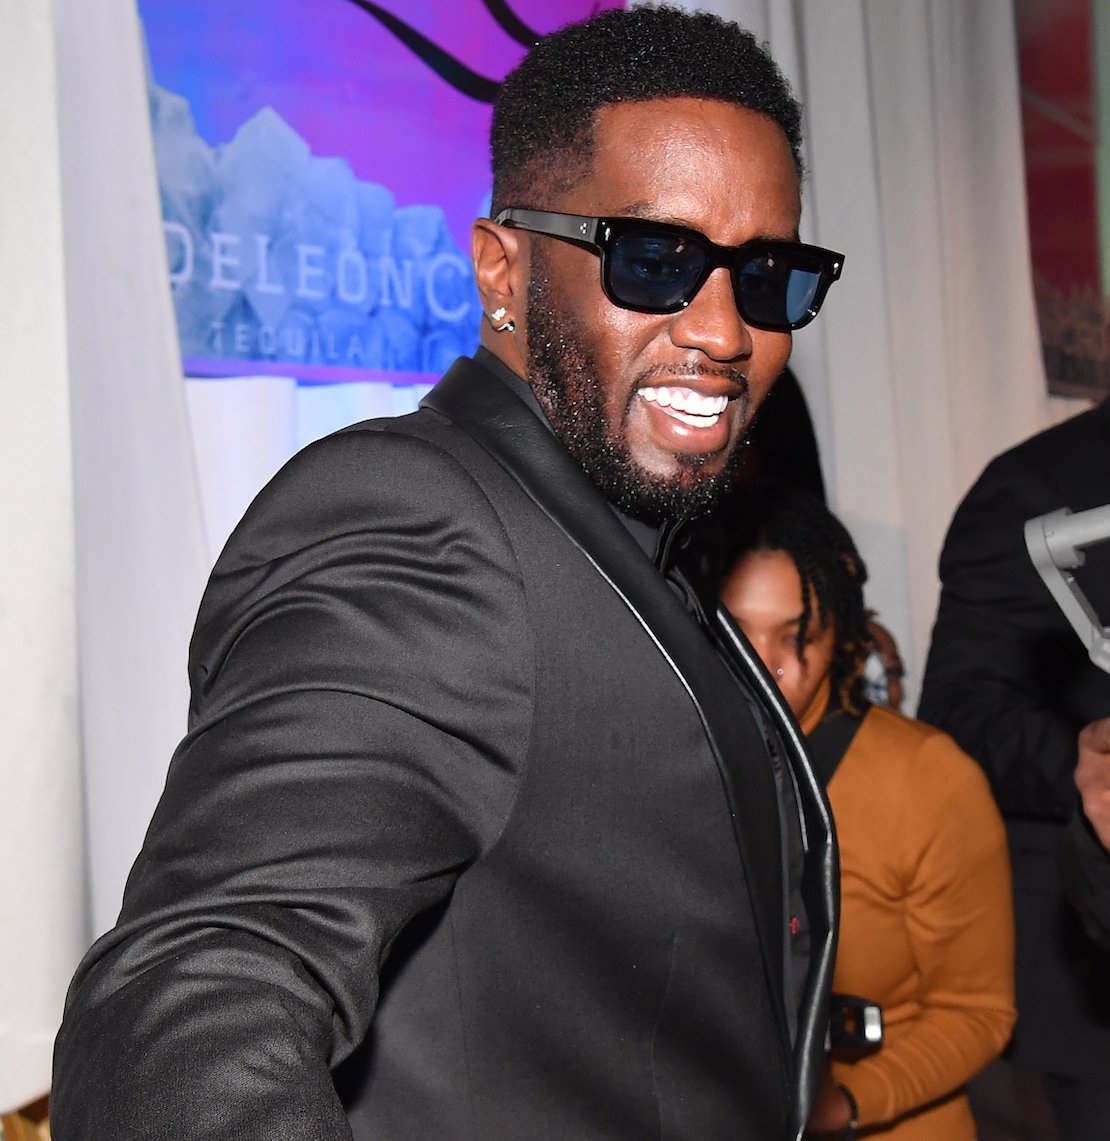 Diddy at a party; he recently declared himself a billionaire